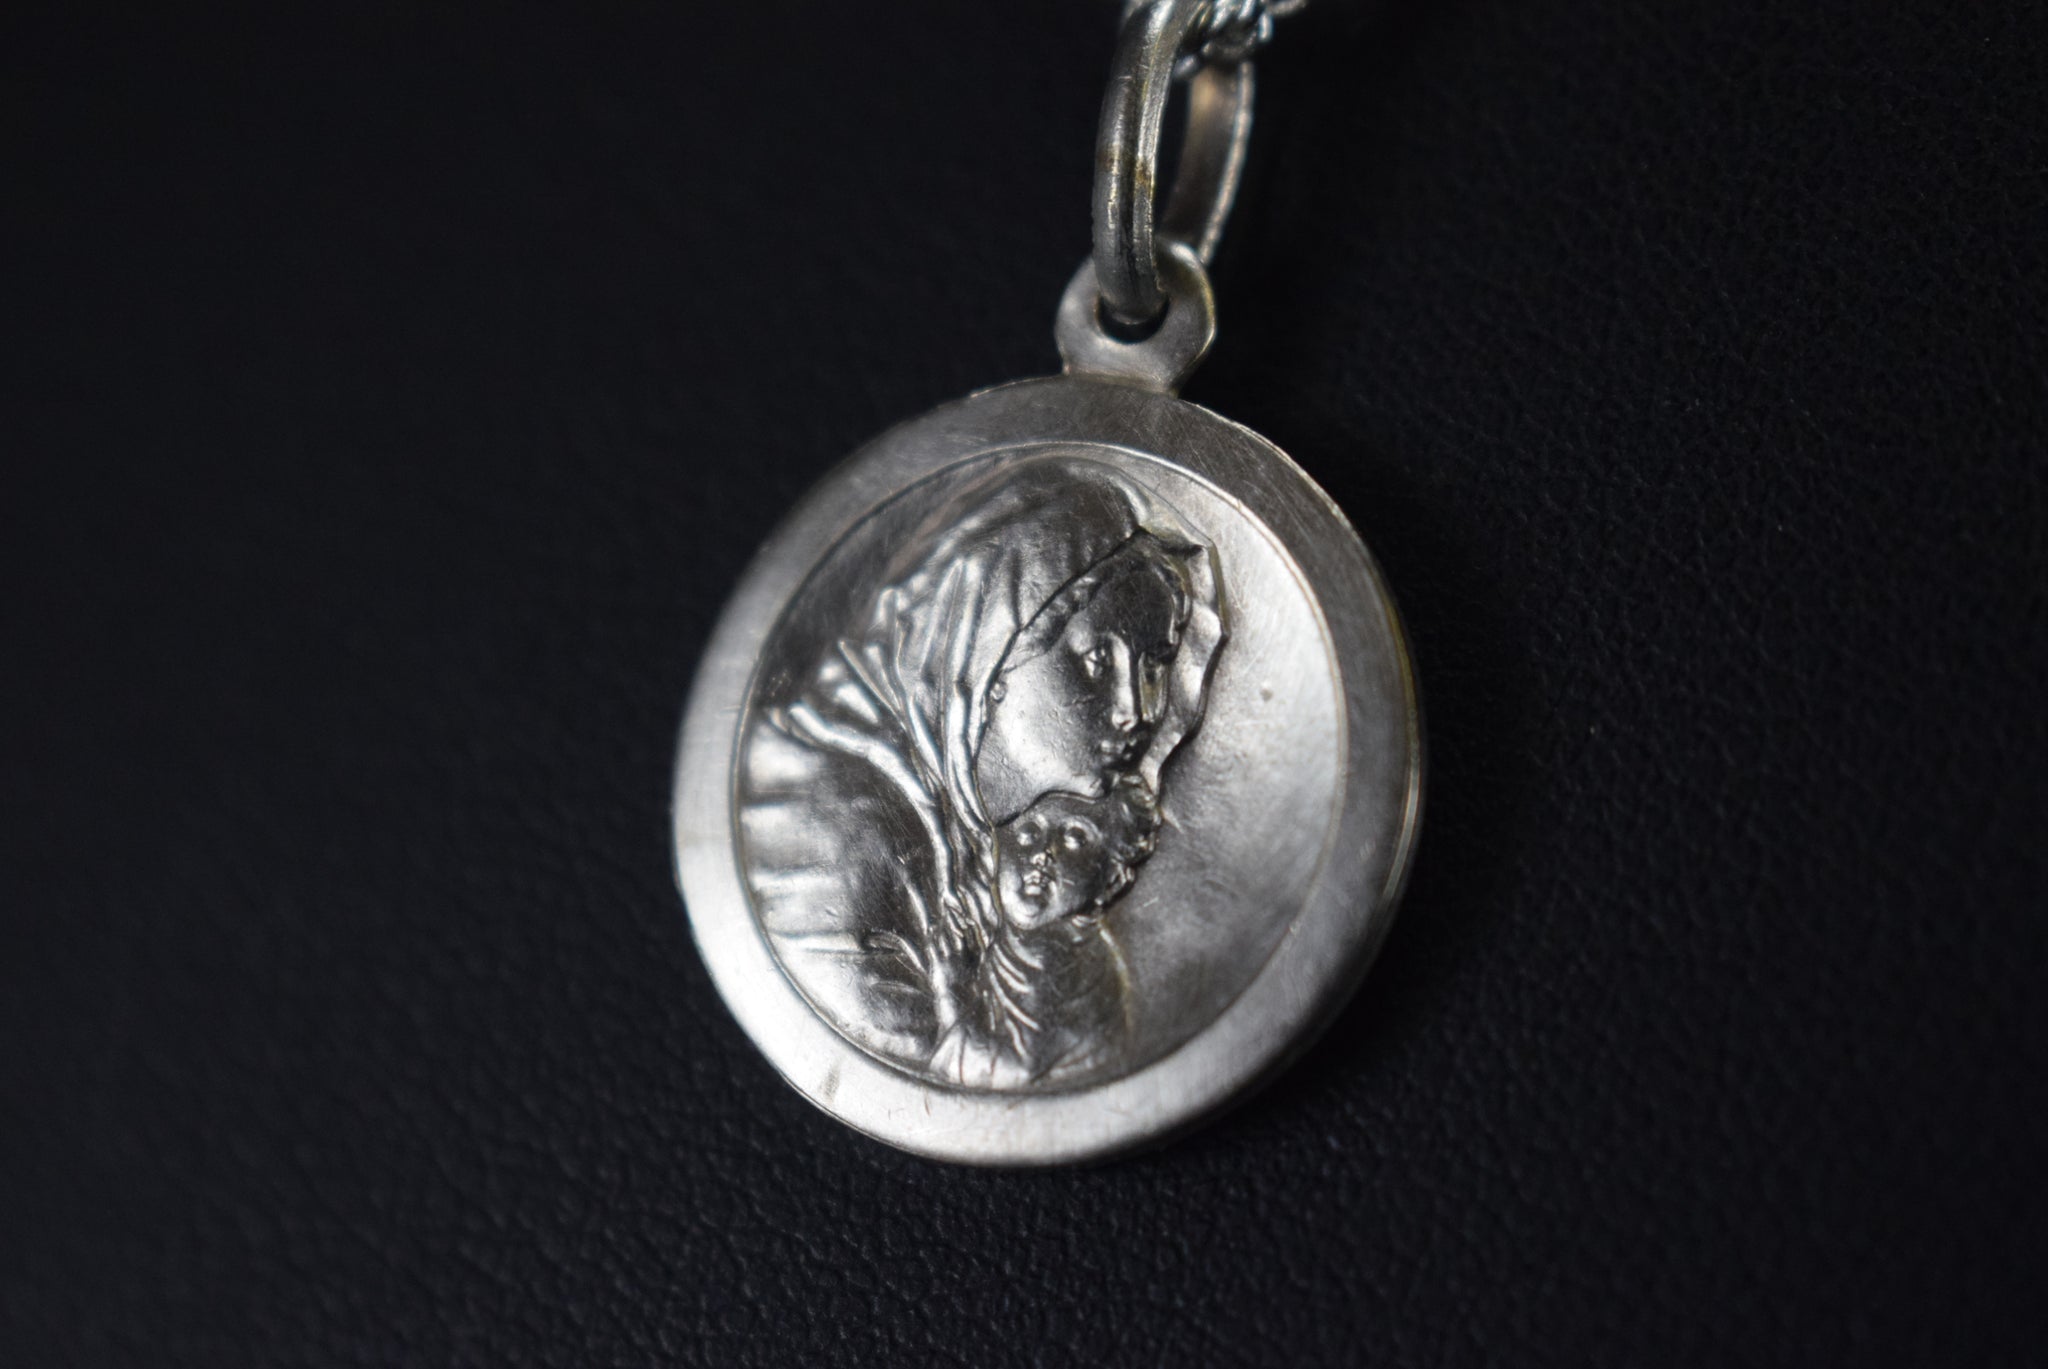 Blessed Marie Victoire Medal Child Protection Pendant - Charmantiques